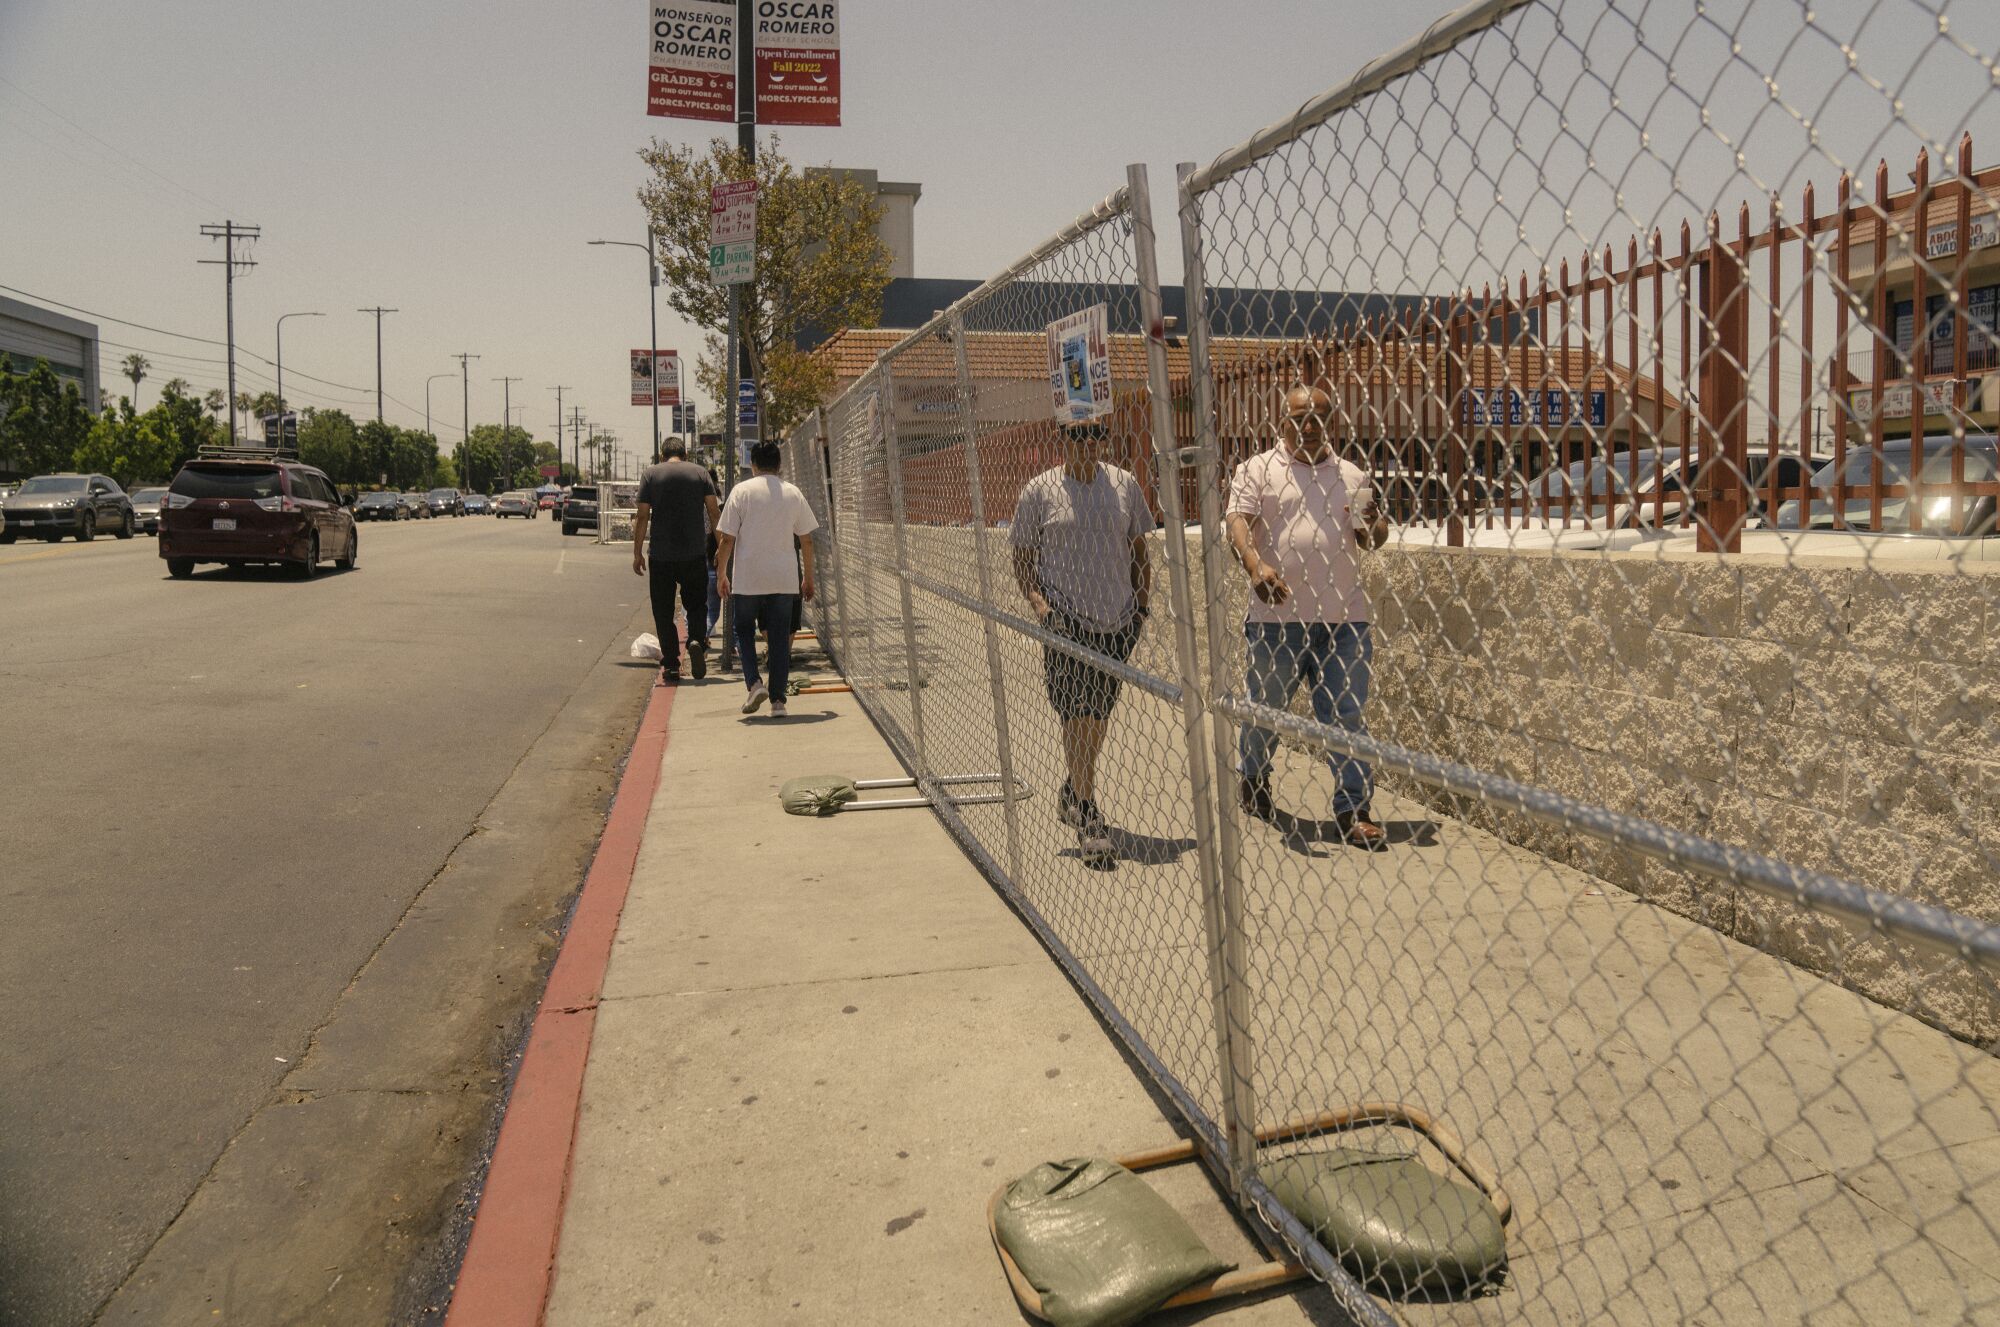 Fencing was installed in May on the sidewalk along parts of the El Salvador Community Corridor on Vermont Avenue.